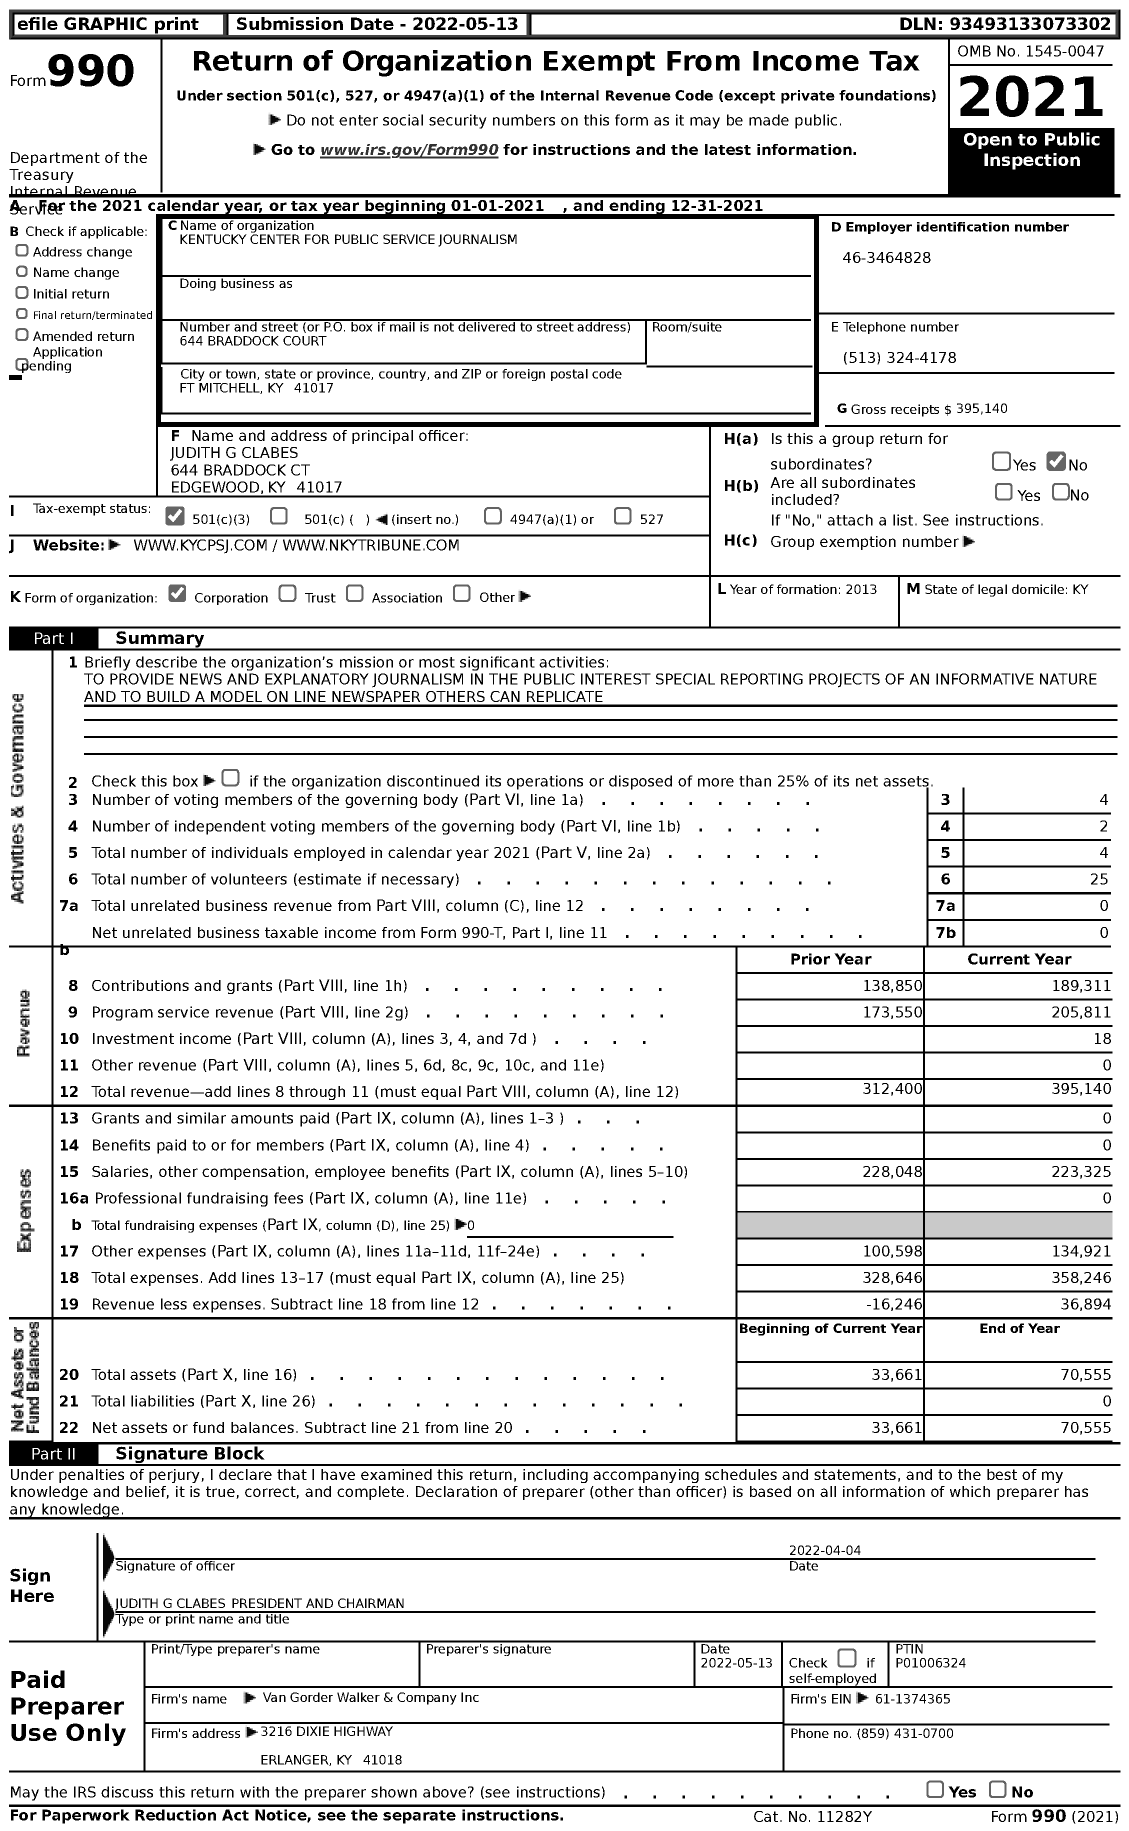 Image of first page of 2021 Form 990 for Kentucky Center for Public Service Journalism